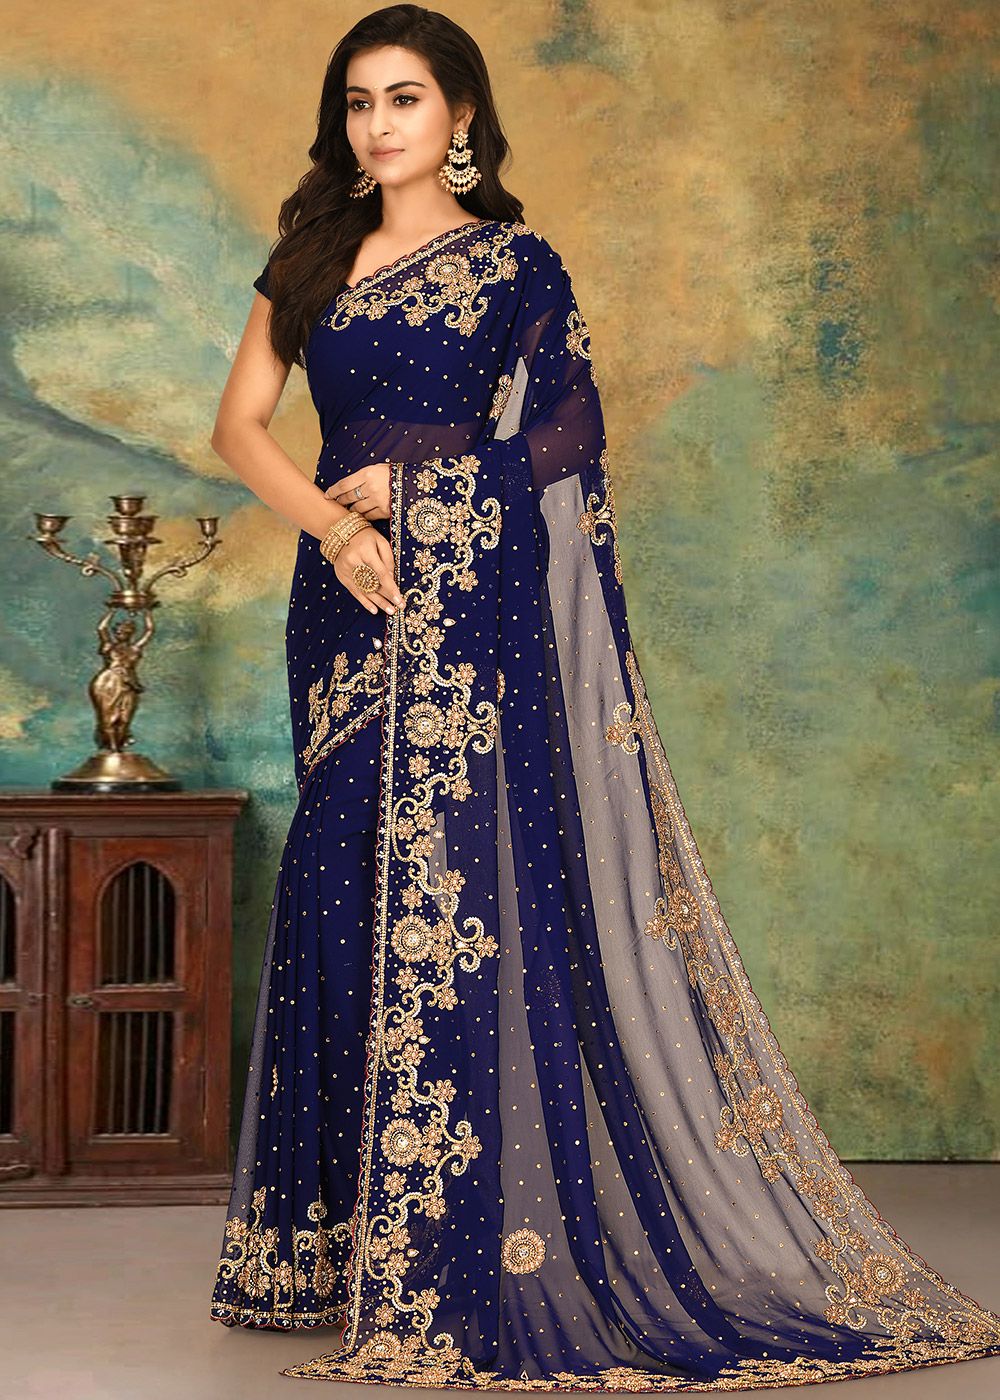 Blue Heavy Border Georgette Saree With Blouse Latest 4075SR09